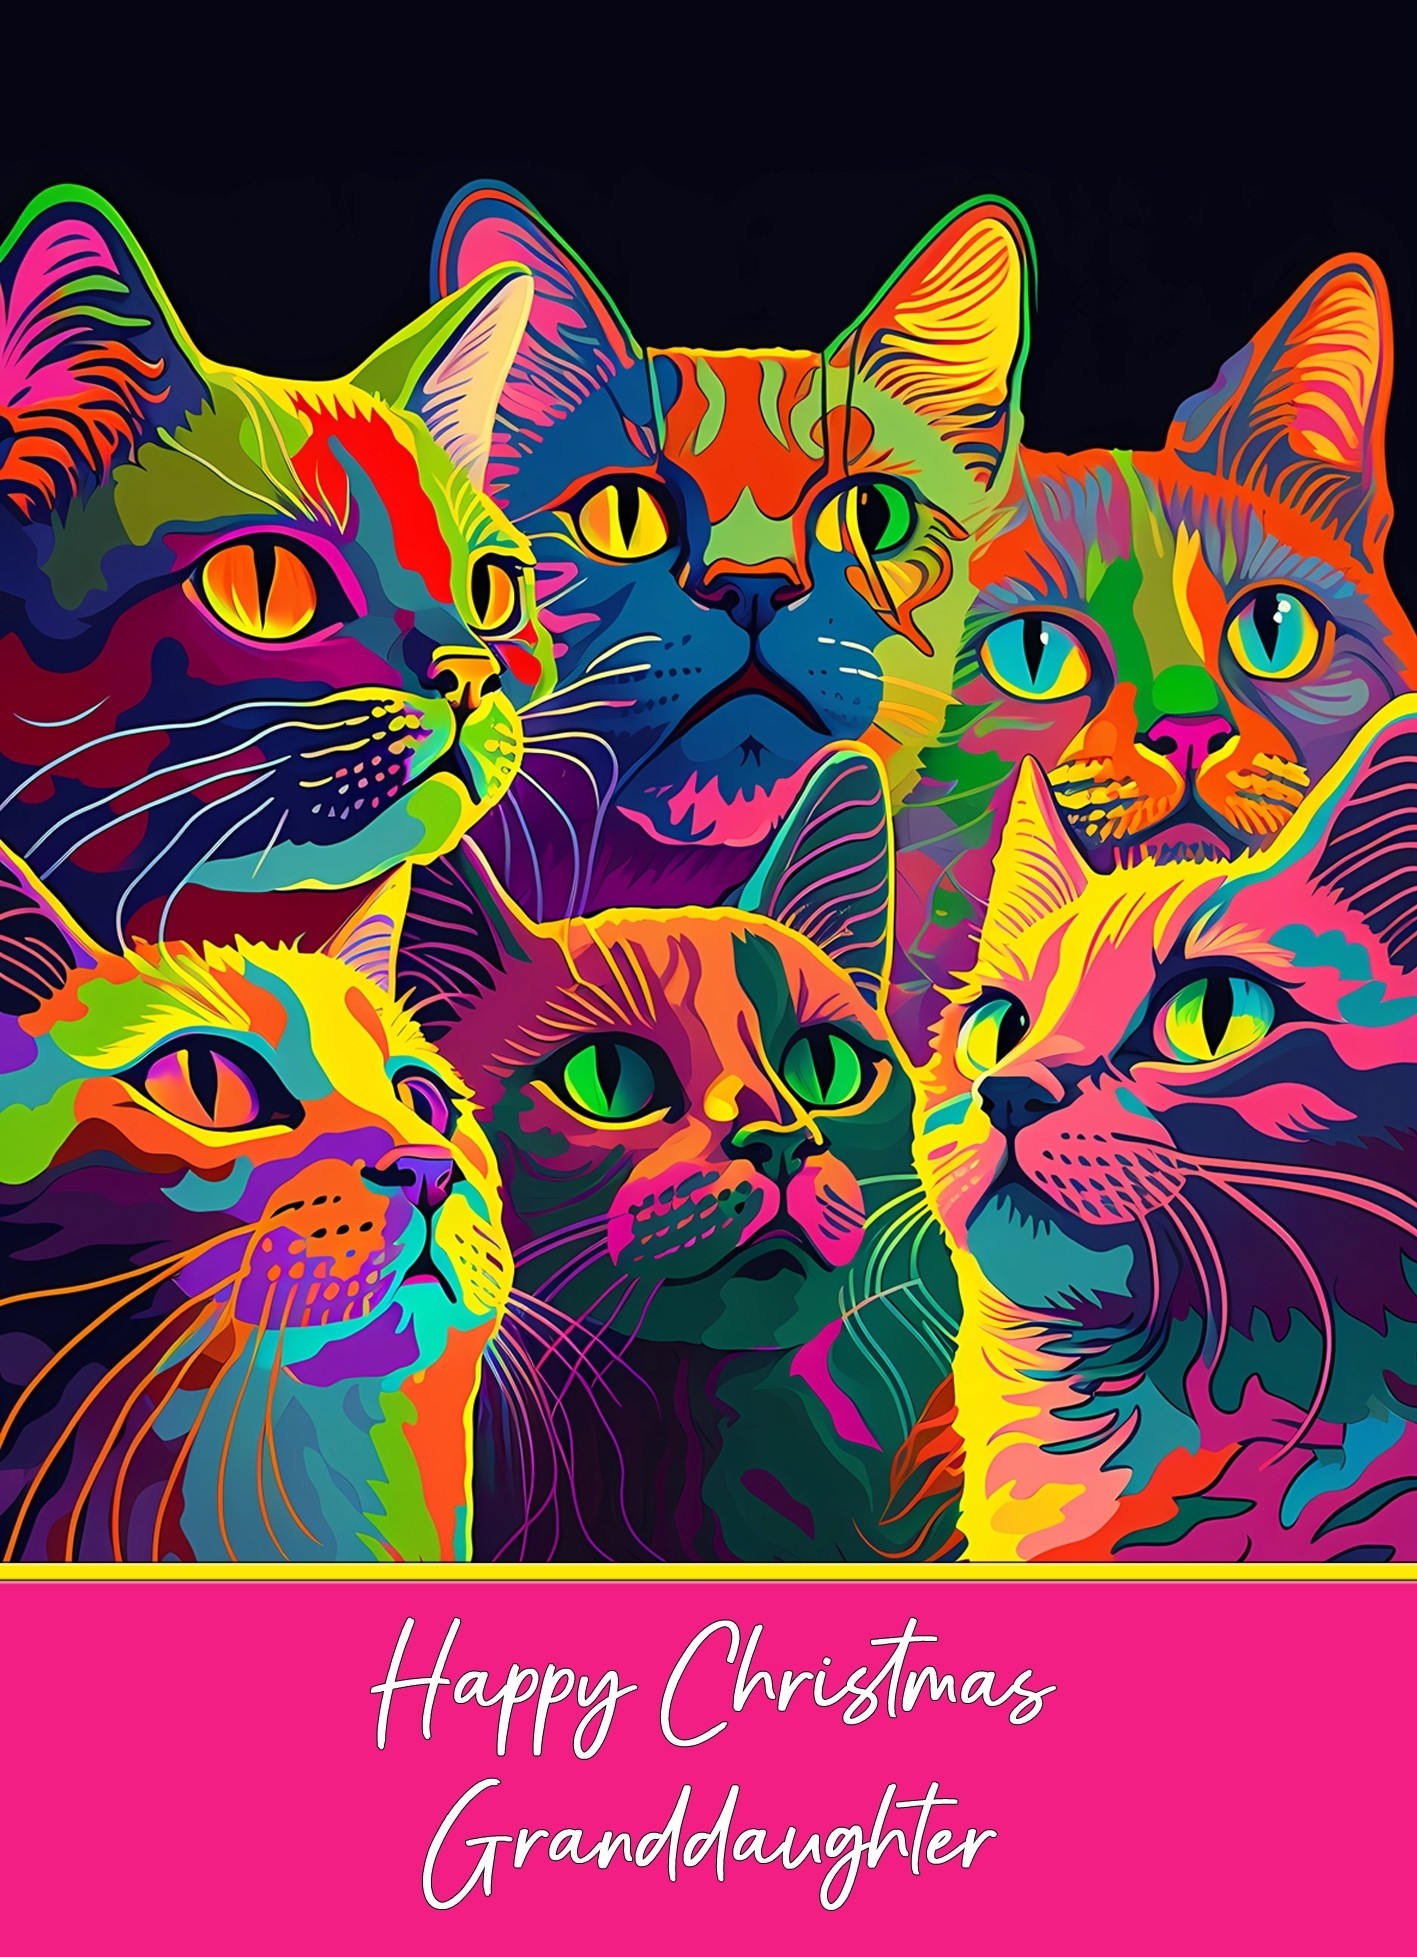 Christmas Card For Granddaughter (Colourful Cat Art)